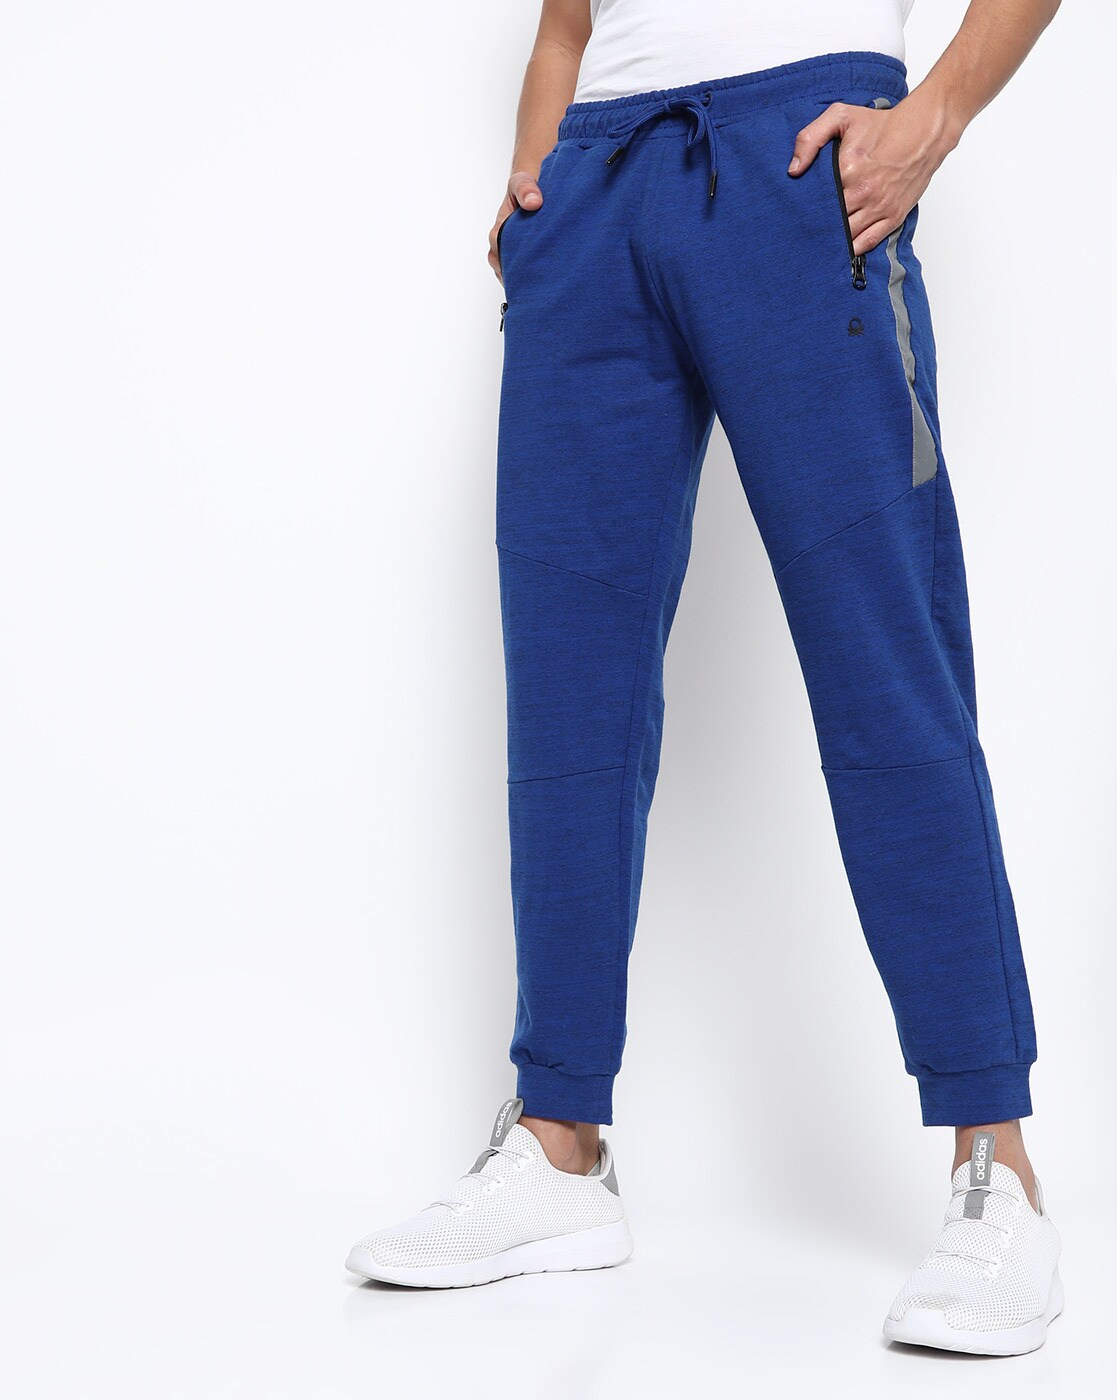 Buy Blue Trousers & Pants for Men by UNITED COLORS OF BENETTON Online